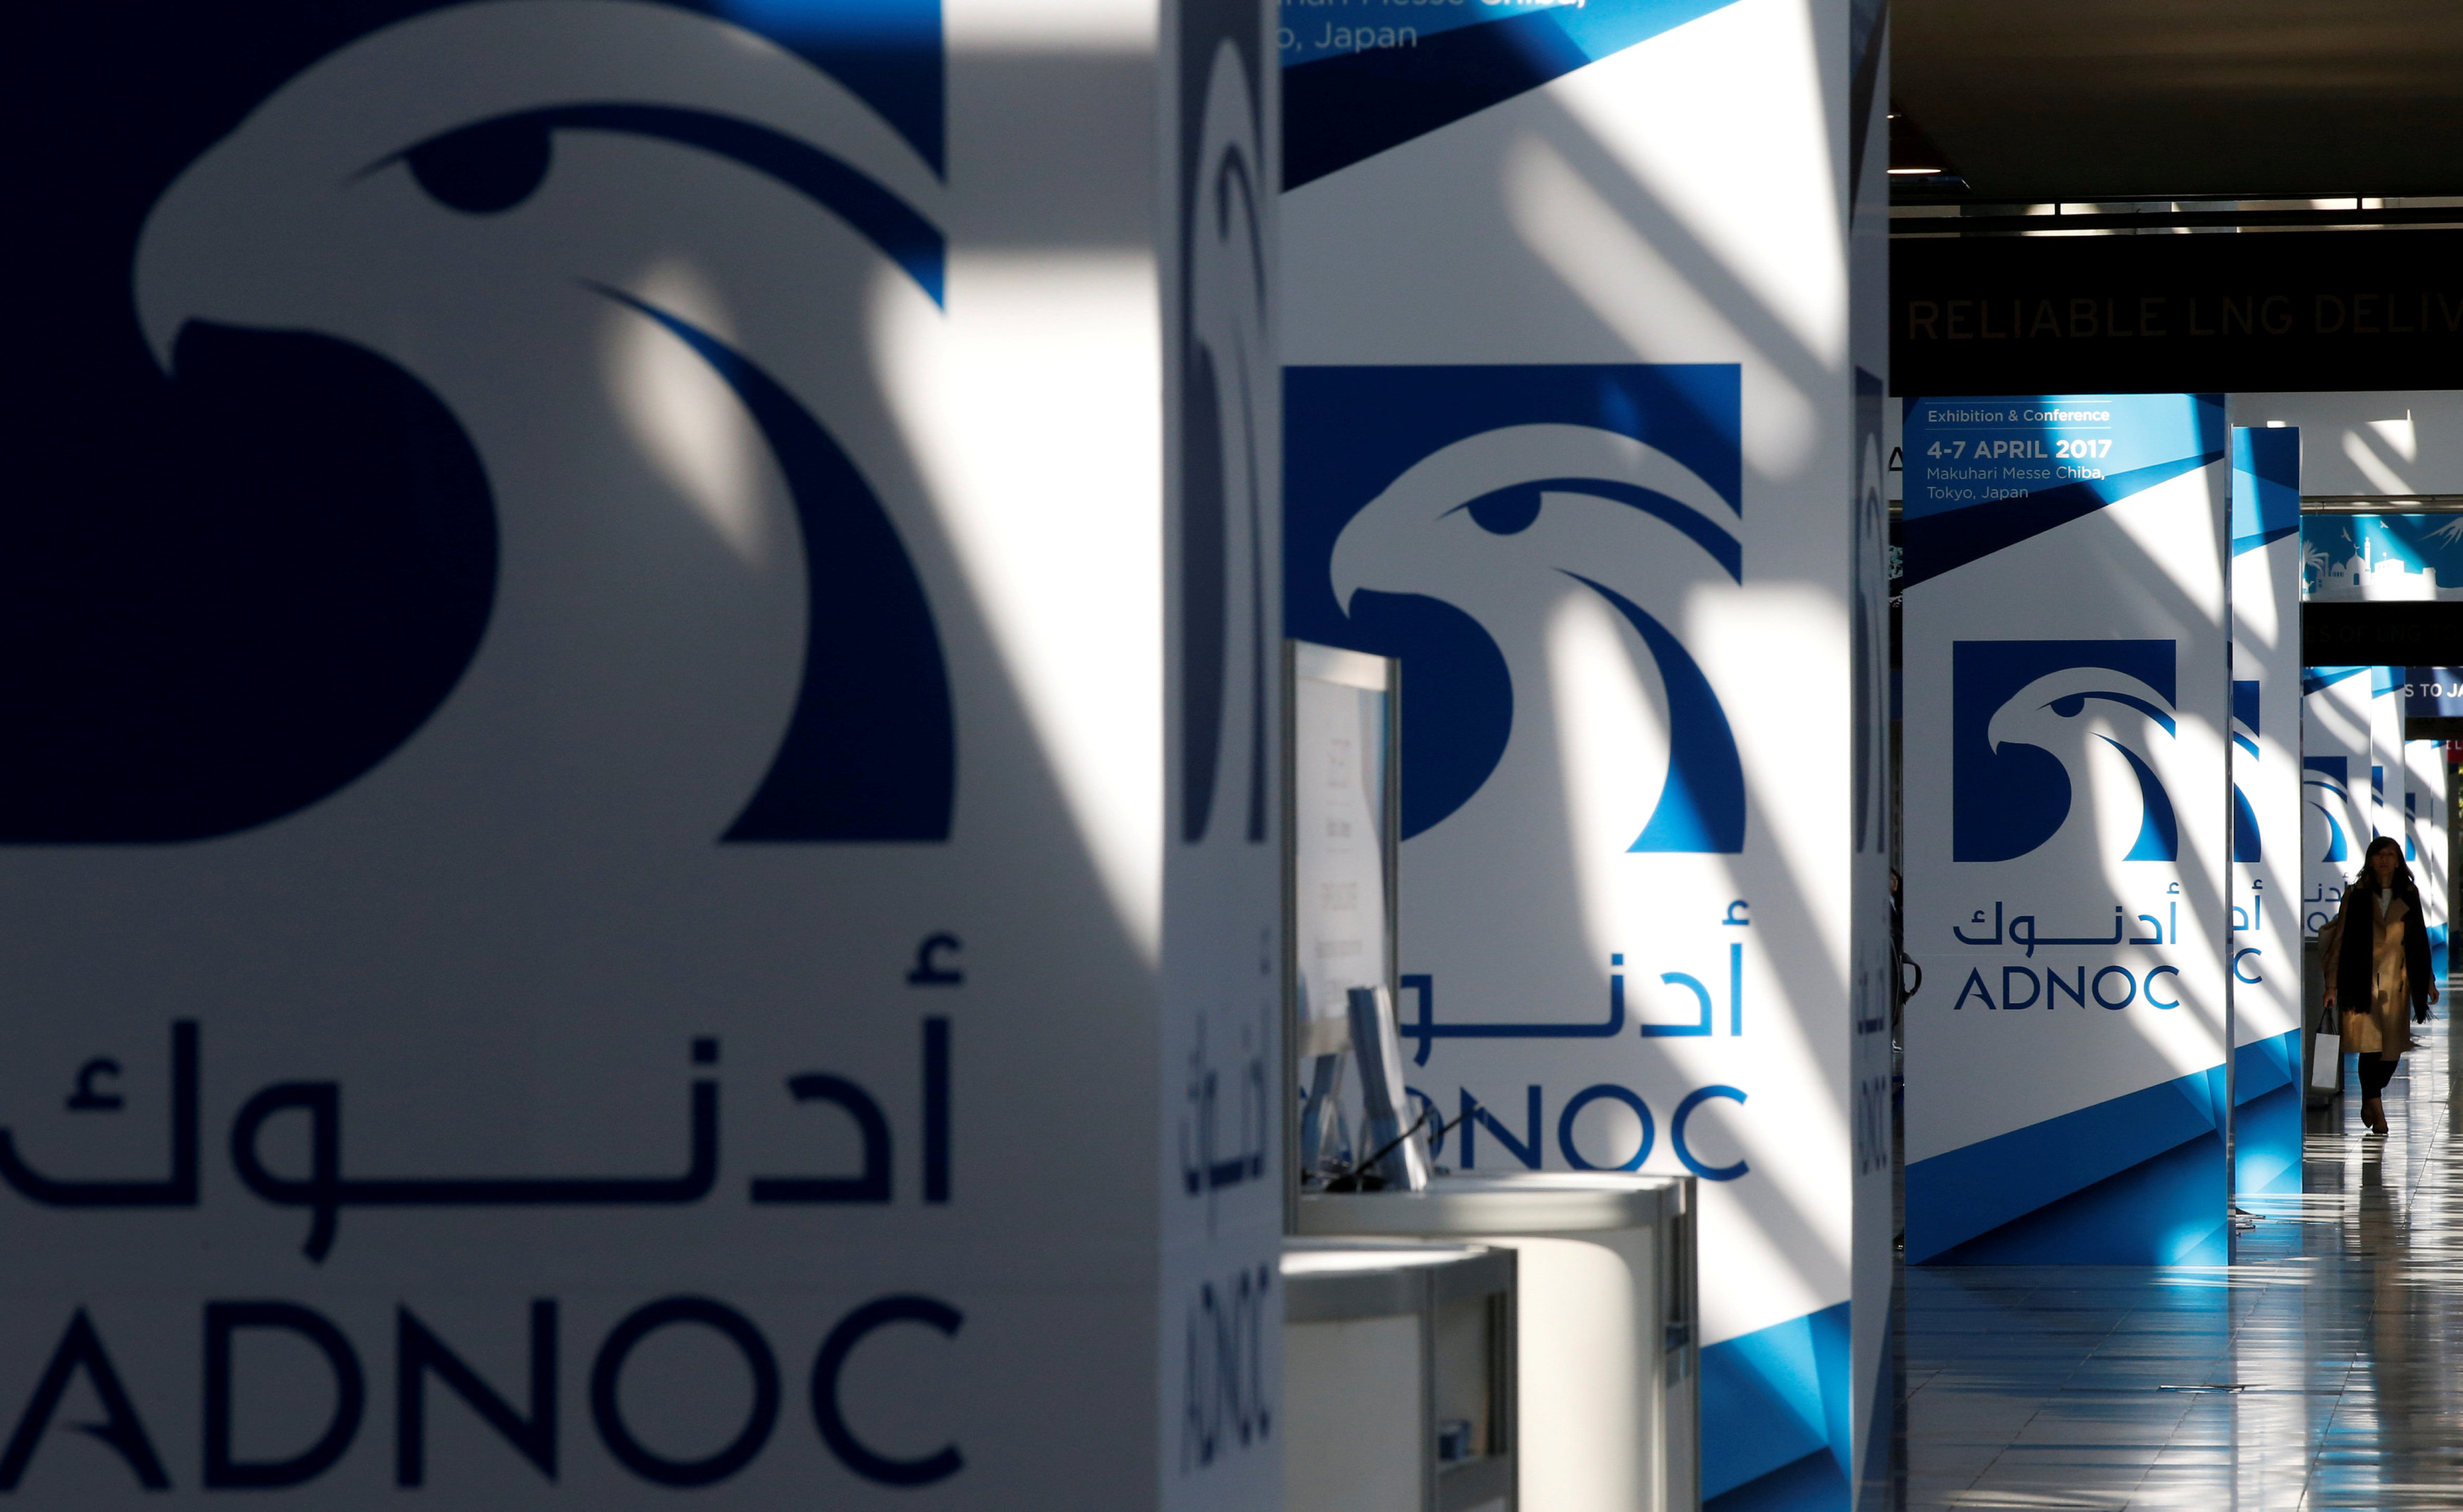 ADNOC to sign deal on Monday for stake in Indian refinery